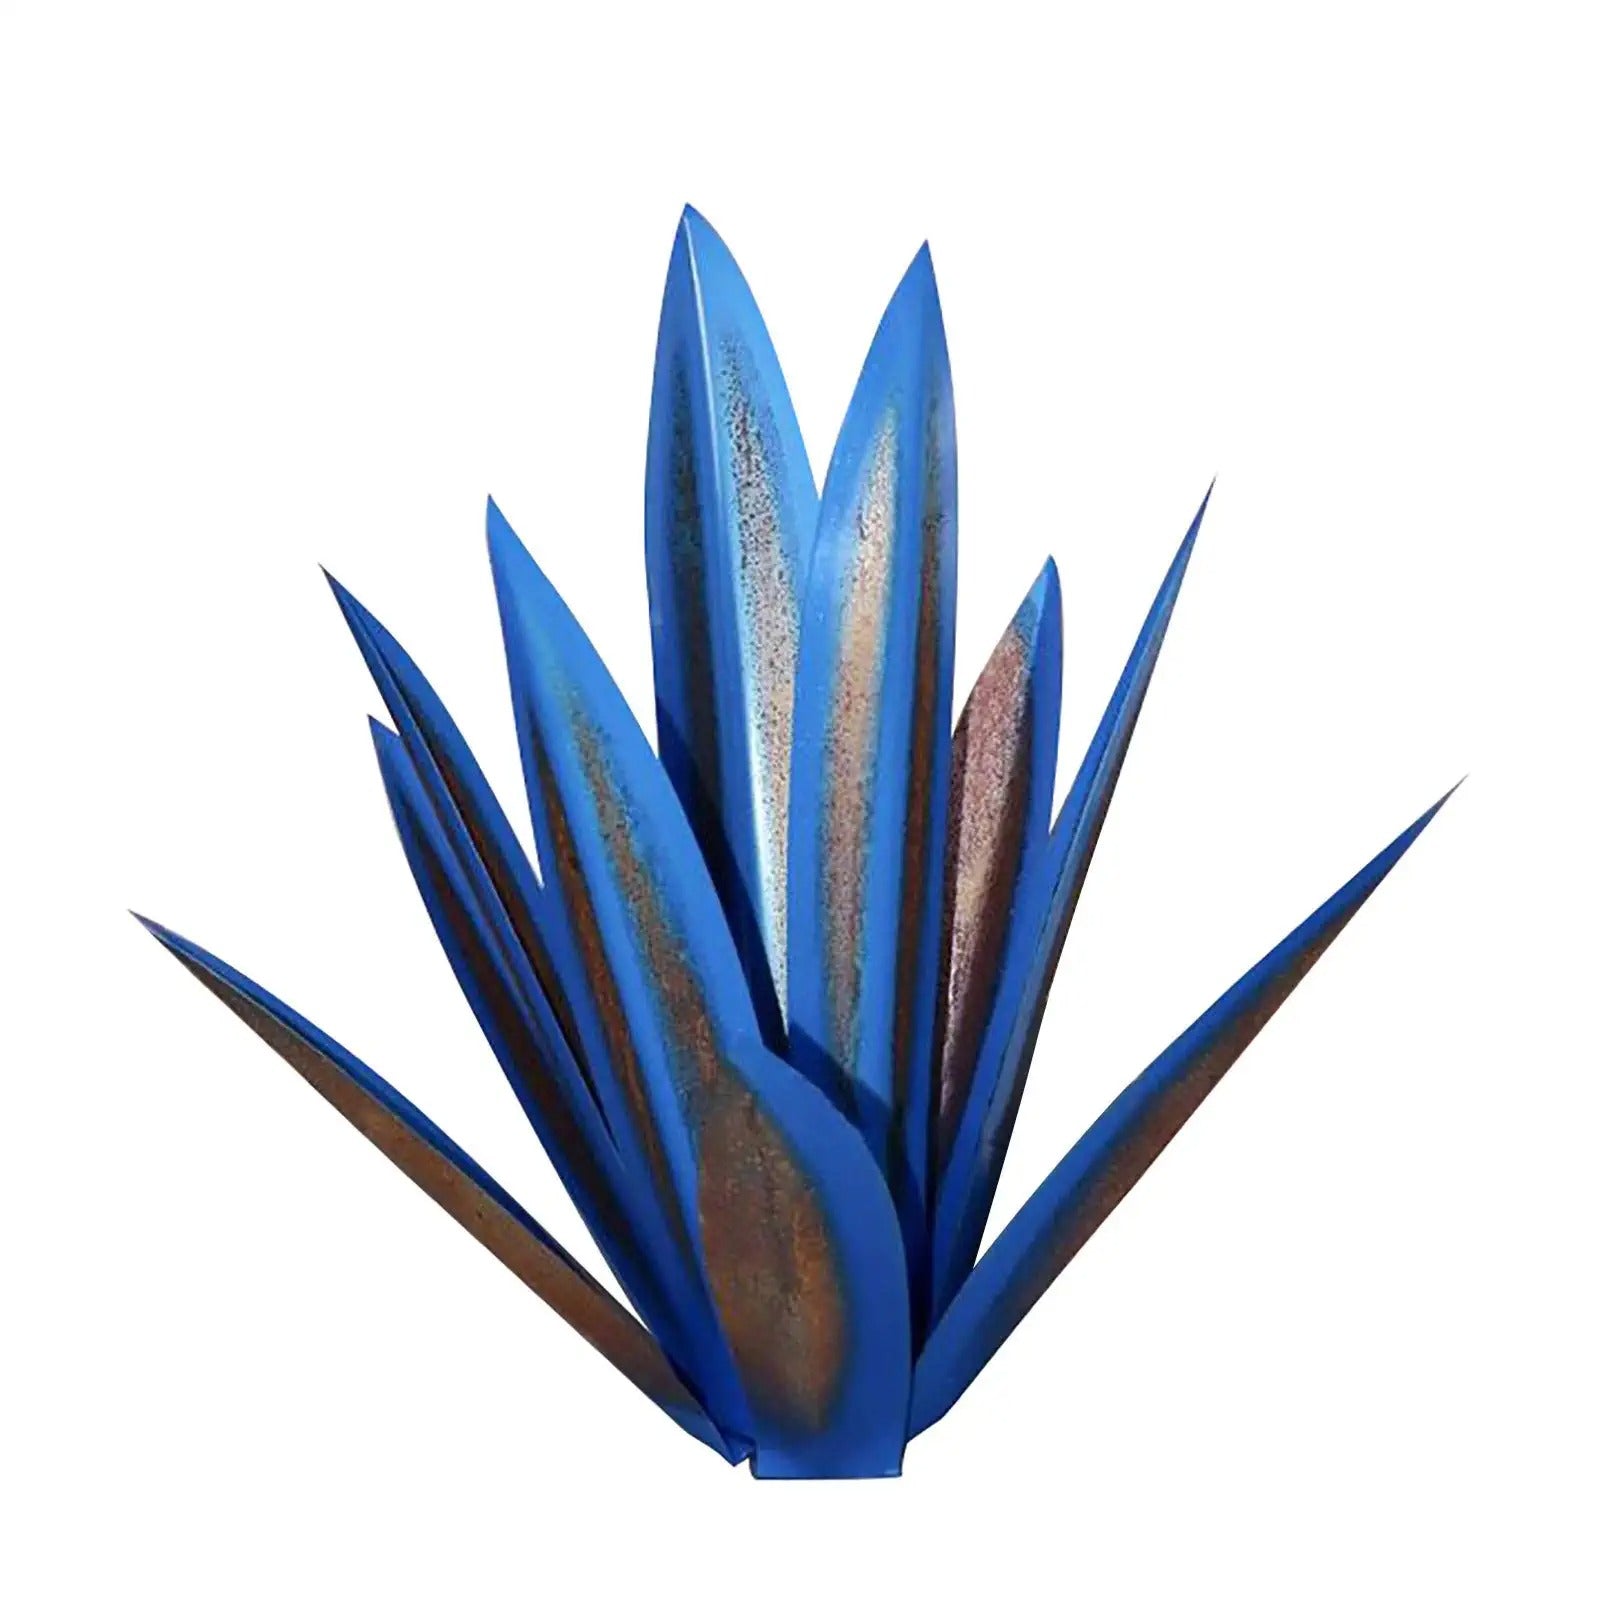 Metal Agave Yard Art Lawn Ornaments Tequila Statue